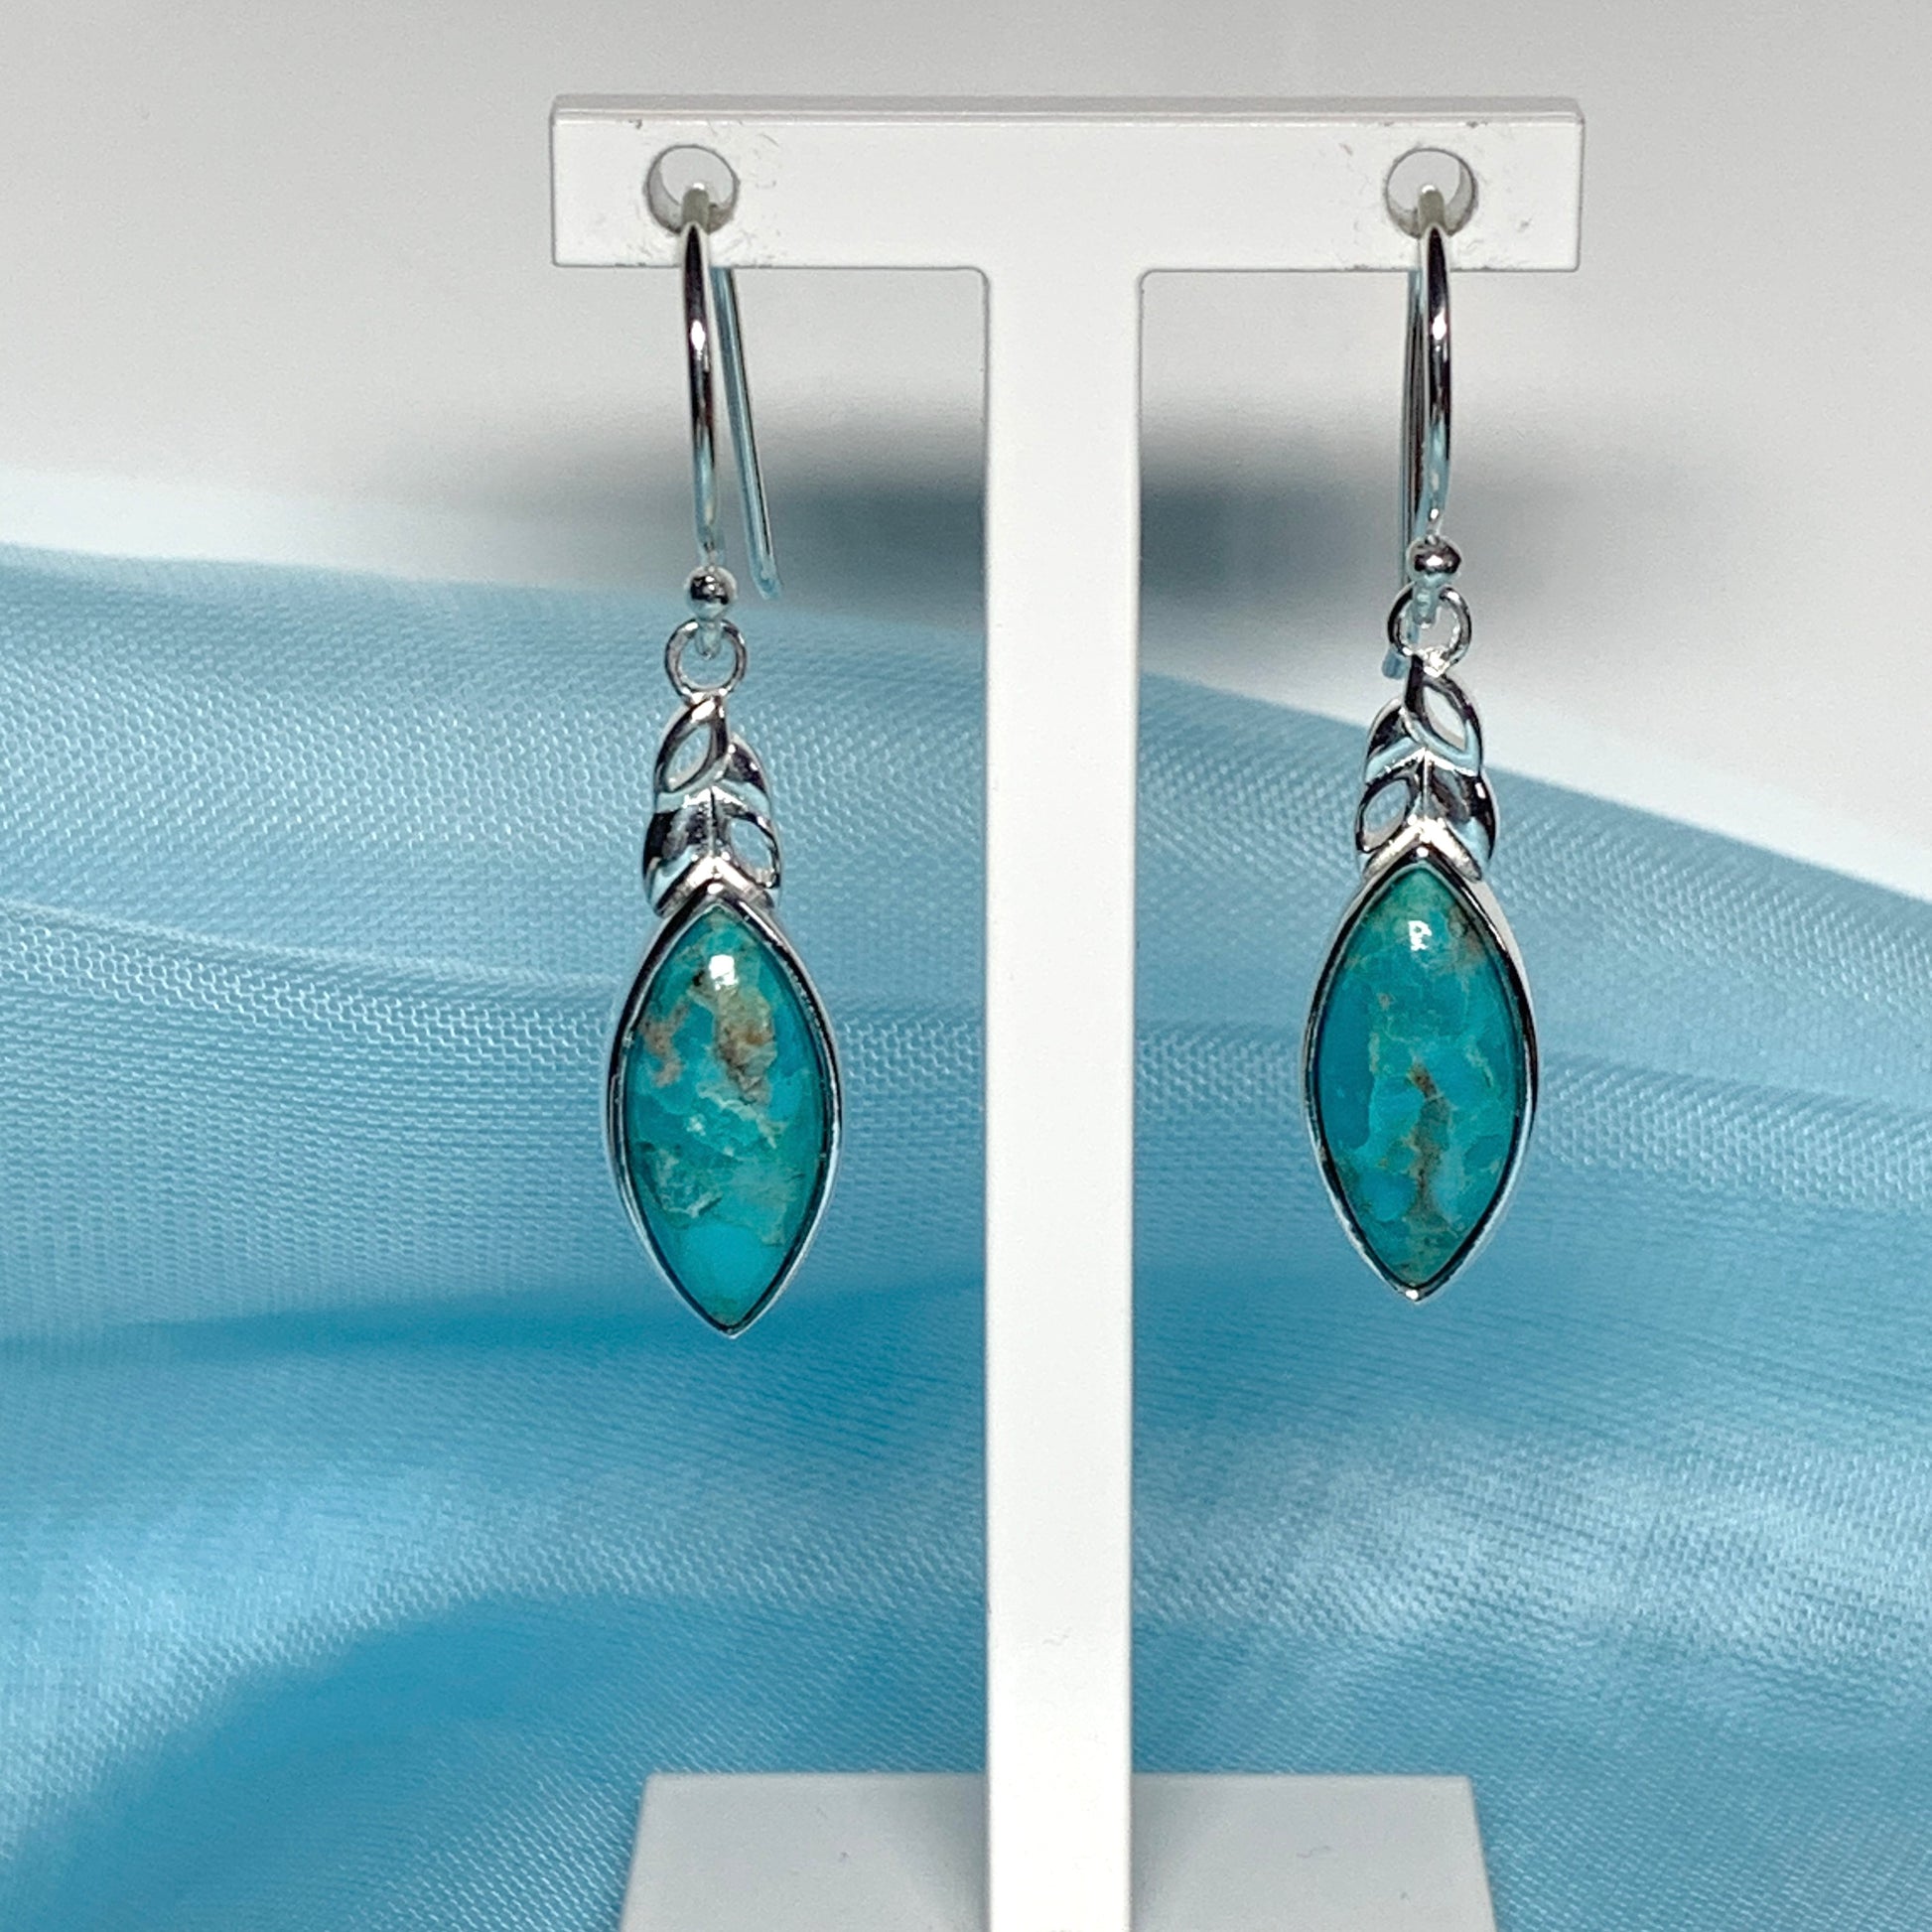 Turquoise earrings drop marquise cut sterling silver